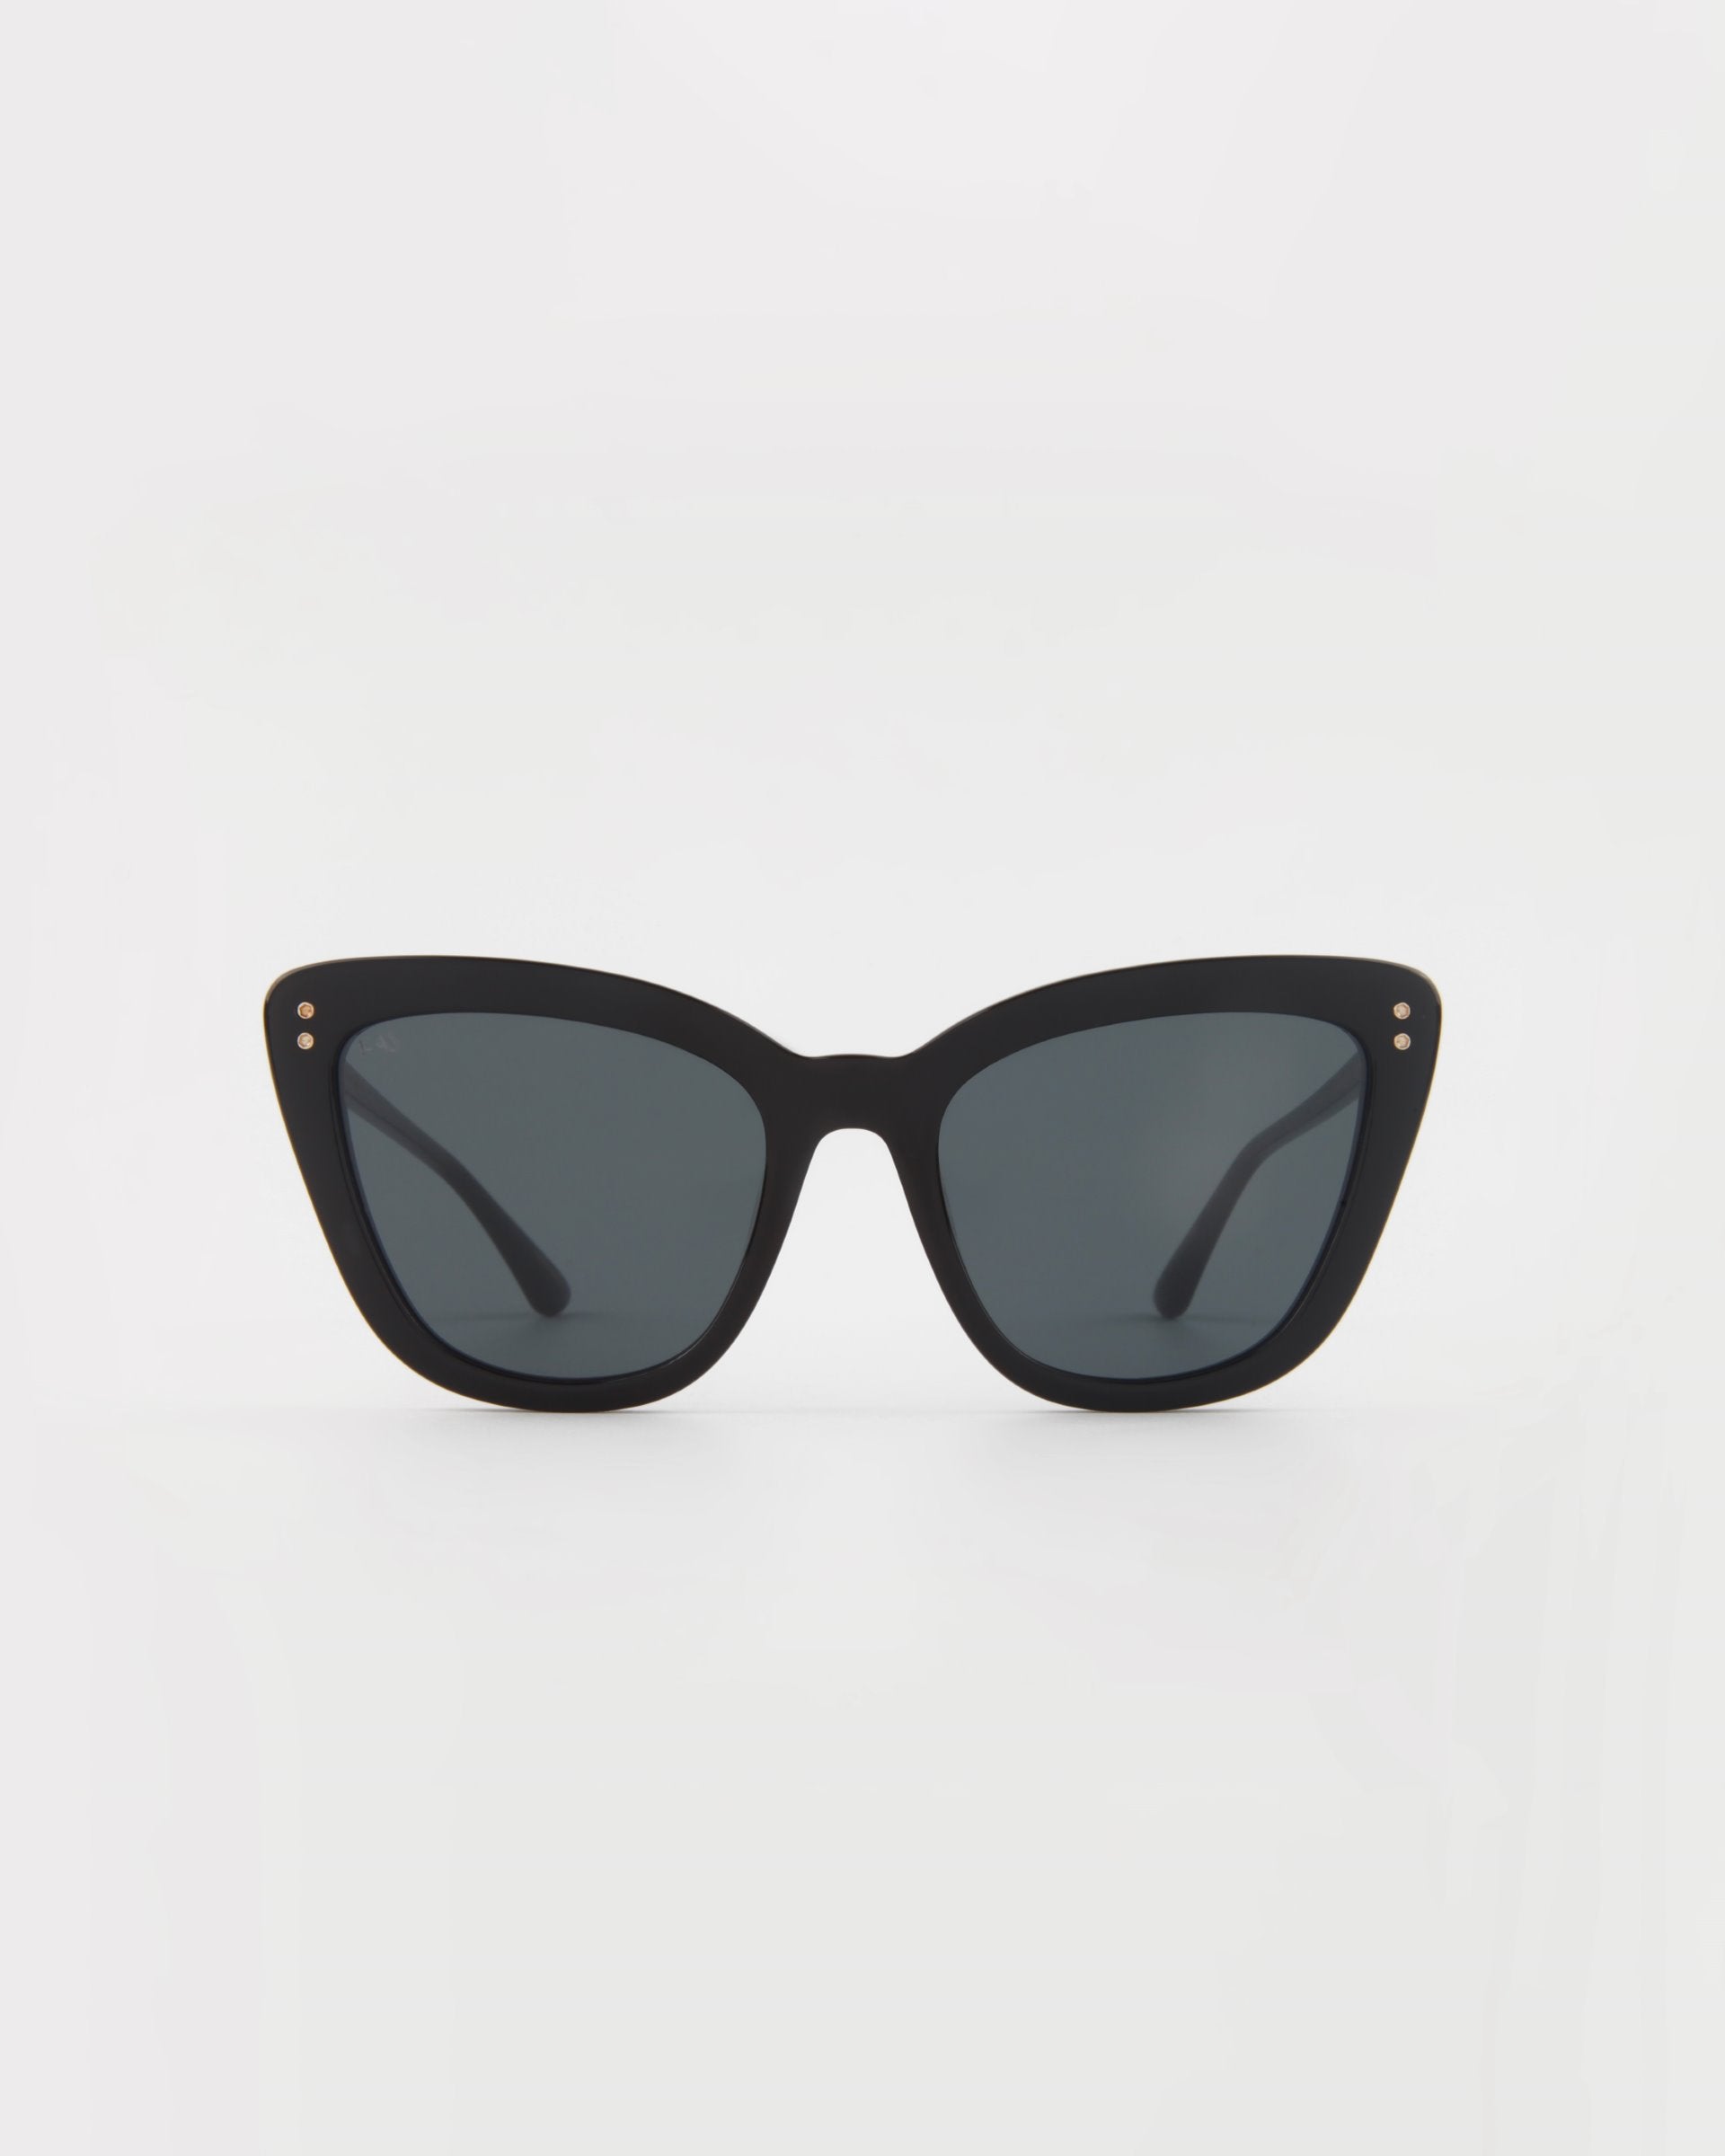 A pair of For Art&#39;s Sake® Ice Cream handmade acetate cat-eye sunglasses with dark tinted lenses is centered against a white background. The frame features small gold accents at the corners of the lenses, ensuring both style and UVA &amp; UVB protection.